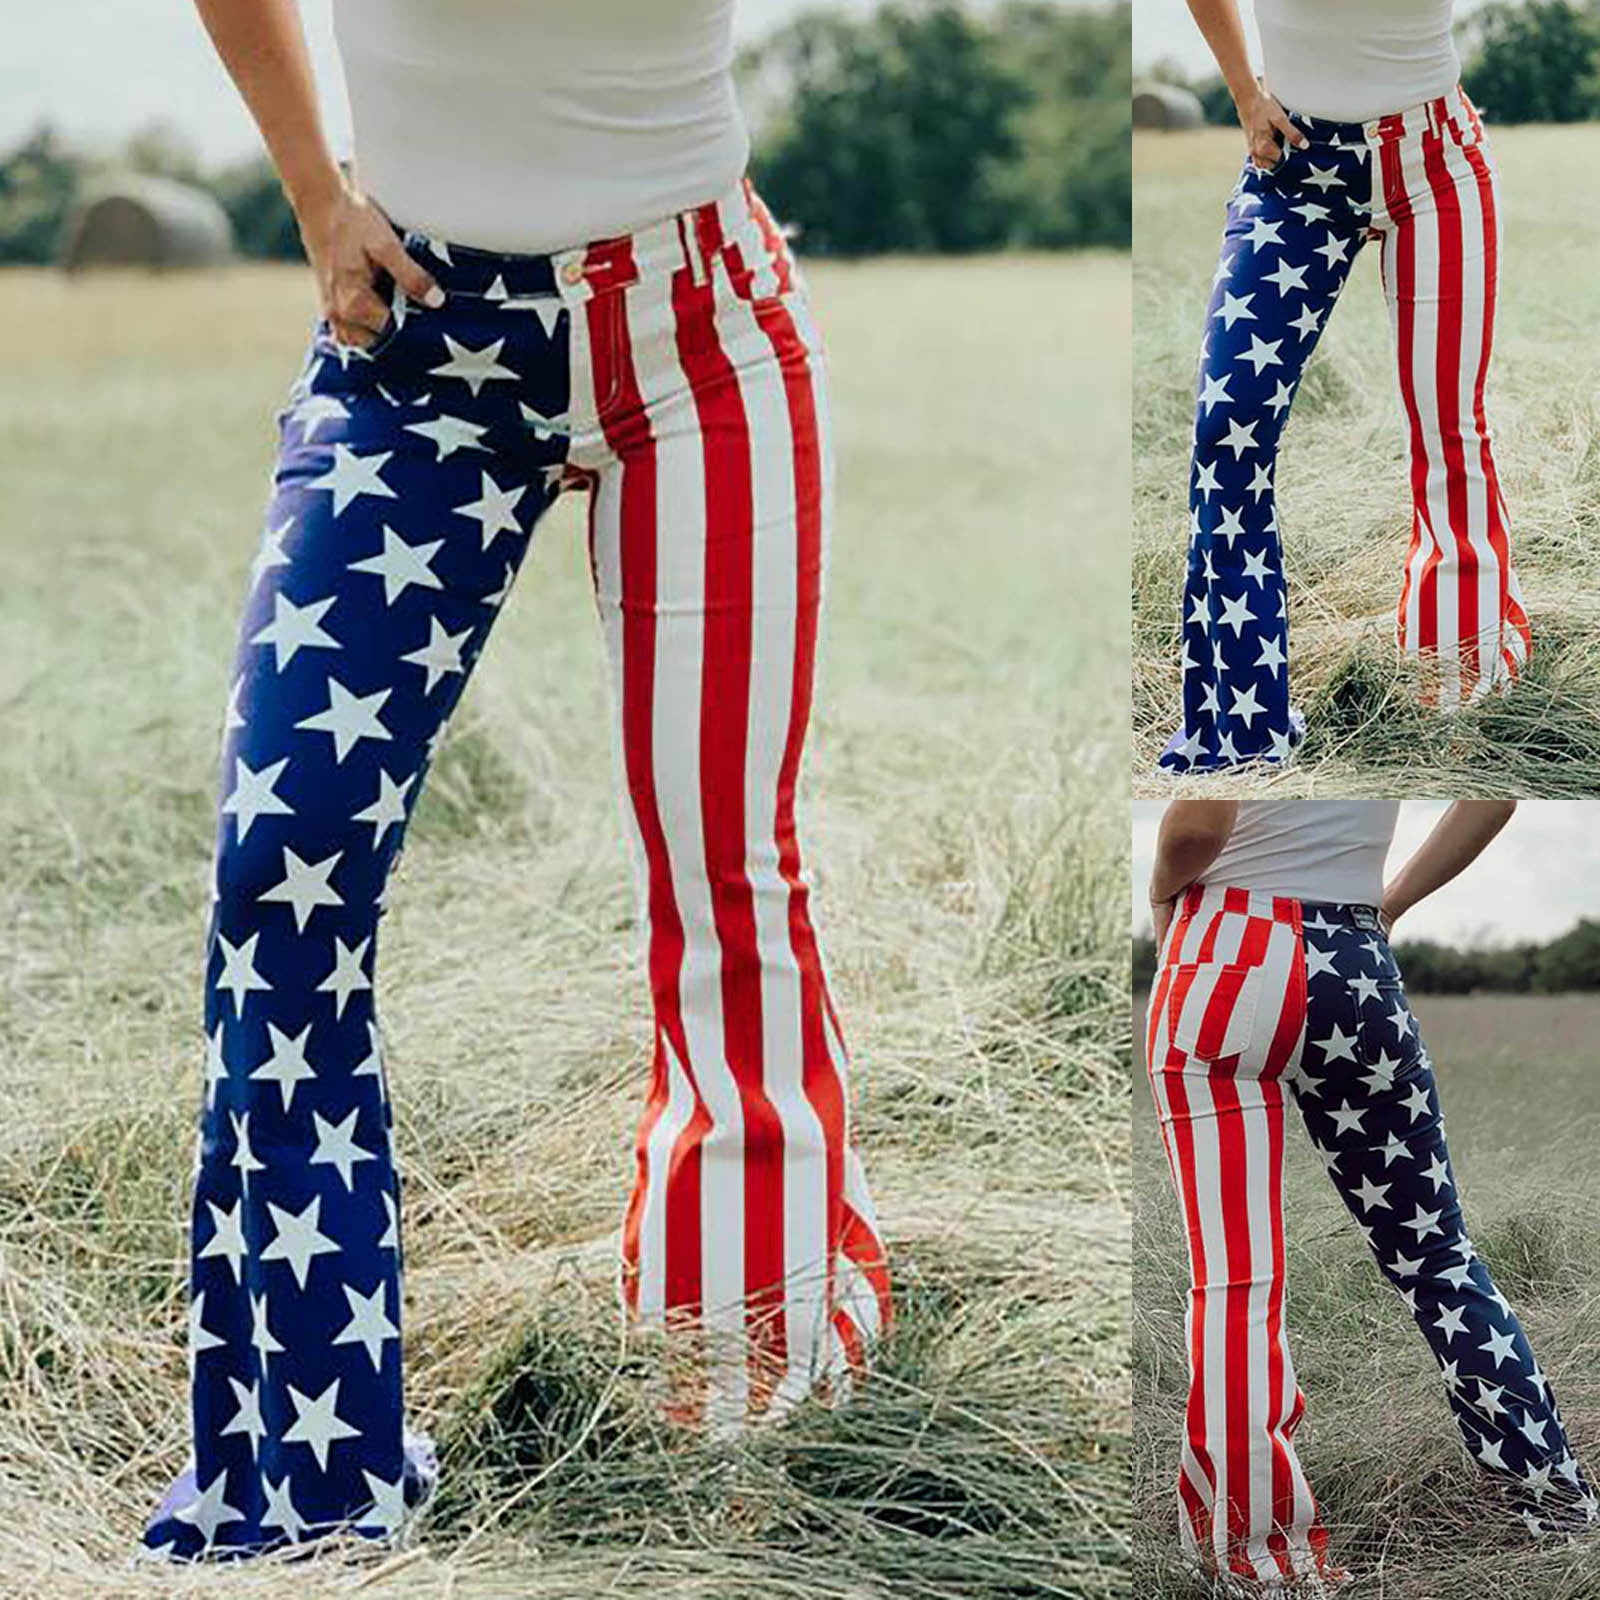 FARYSAYS American Flag Pattern Jeans Womens Blue Jeans Fashion Jeans Girls  Pants for Womens Boyfriend Jeans with Patches Denim joggers for womens  Leggings 